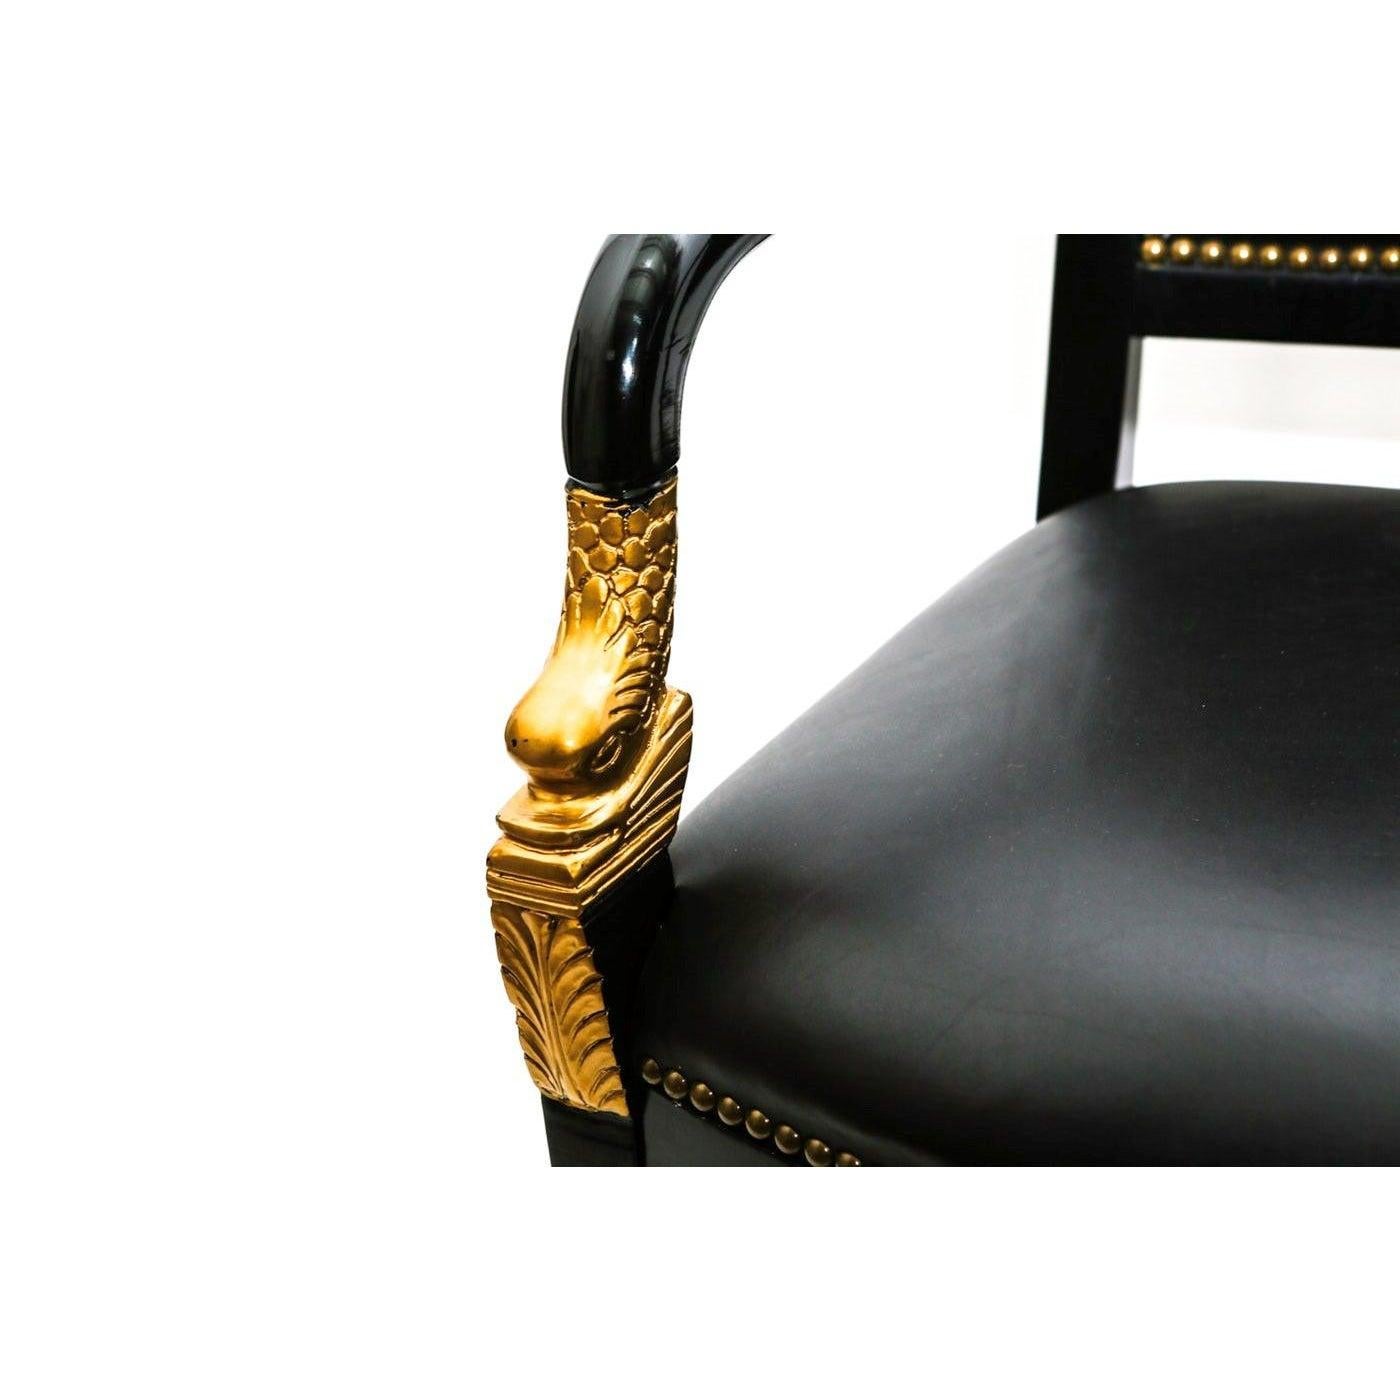 Late 19th century pair of majestic French Empire mahogany fauteuils (open armchairs) finished in a rich black lacquered color. This pair of chairs consist of a top rail leading down to shaped arms with carved foliate design and superbly carved